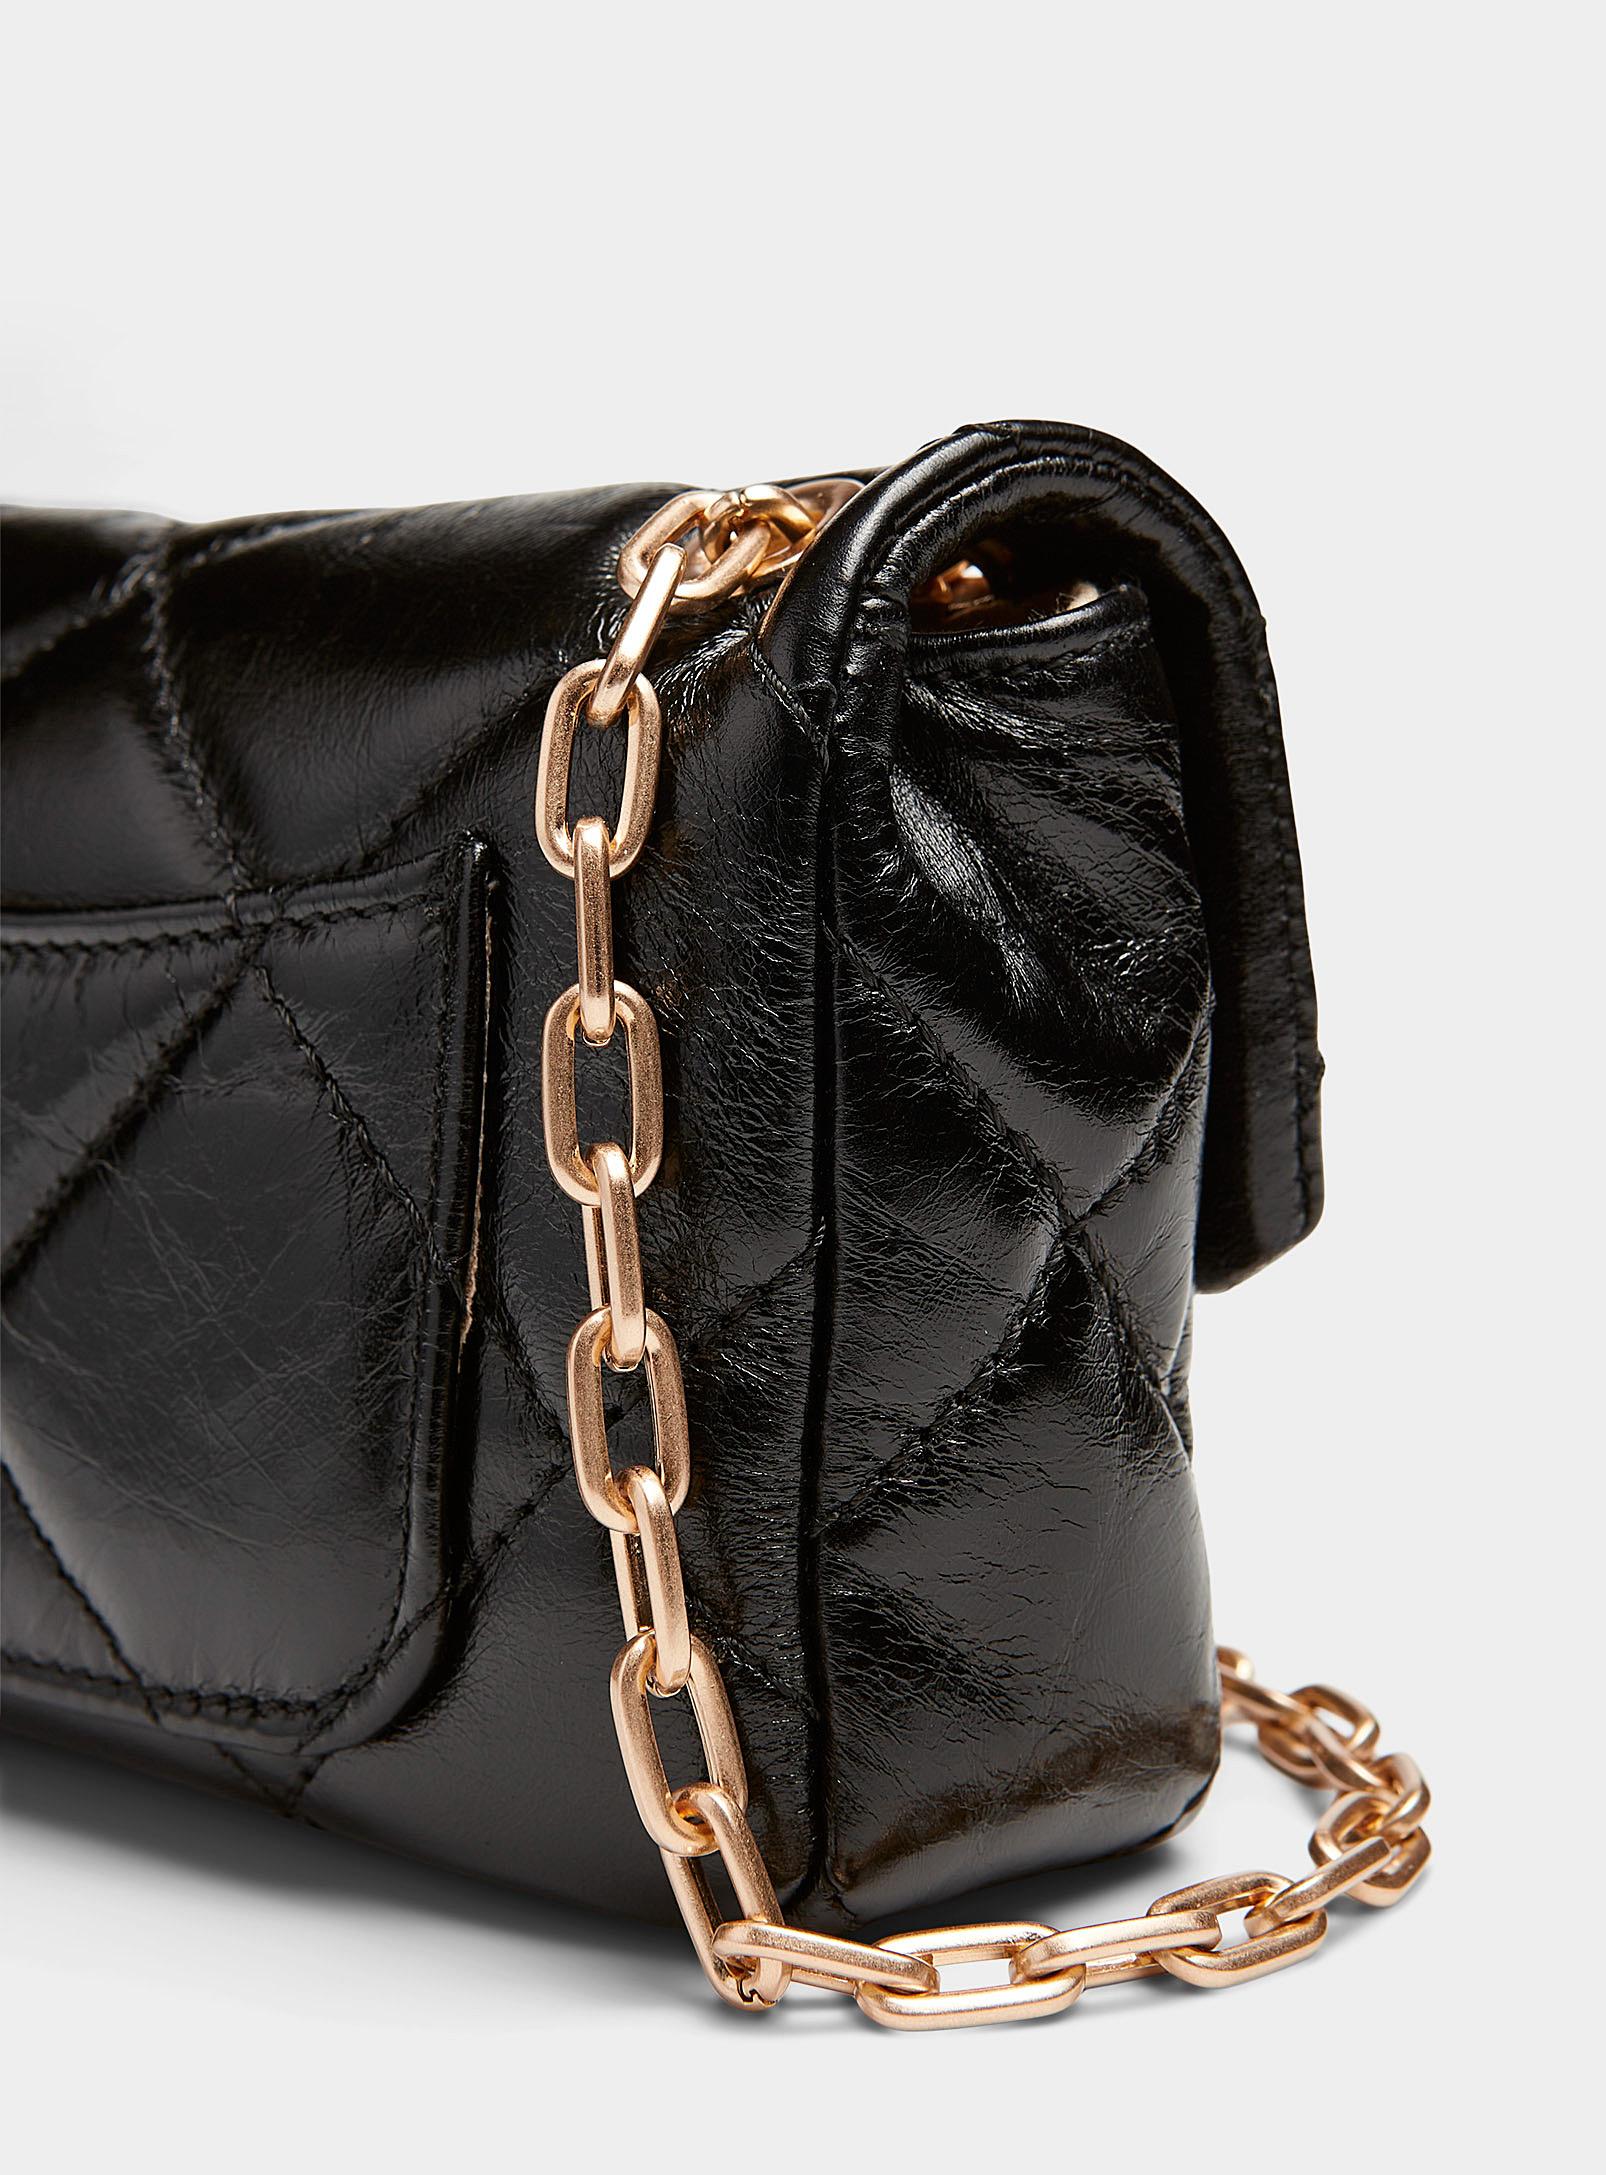 Quilted Leather S Cabas Tote Carried by Hand or On the Shoulder